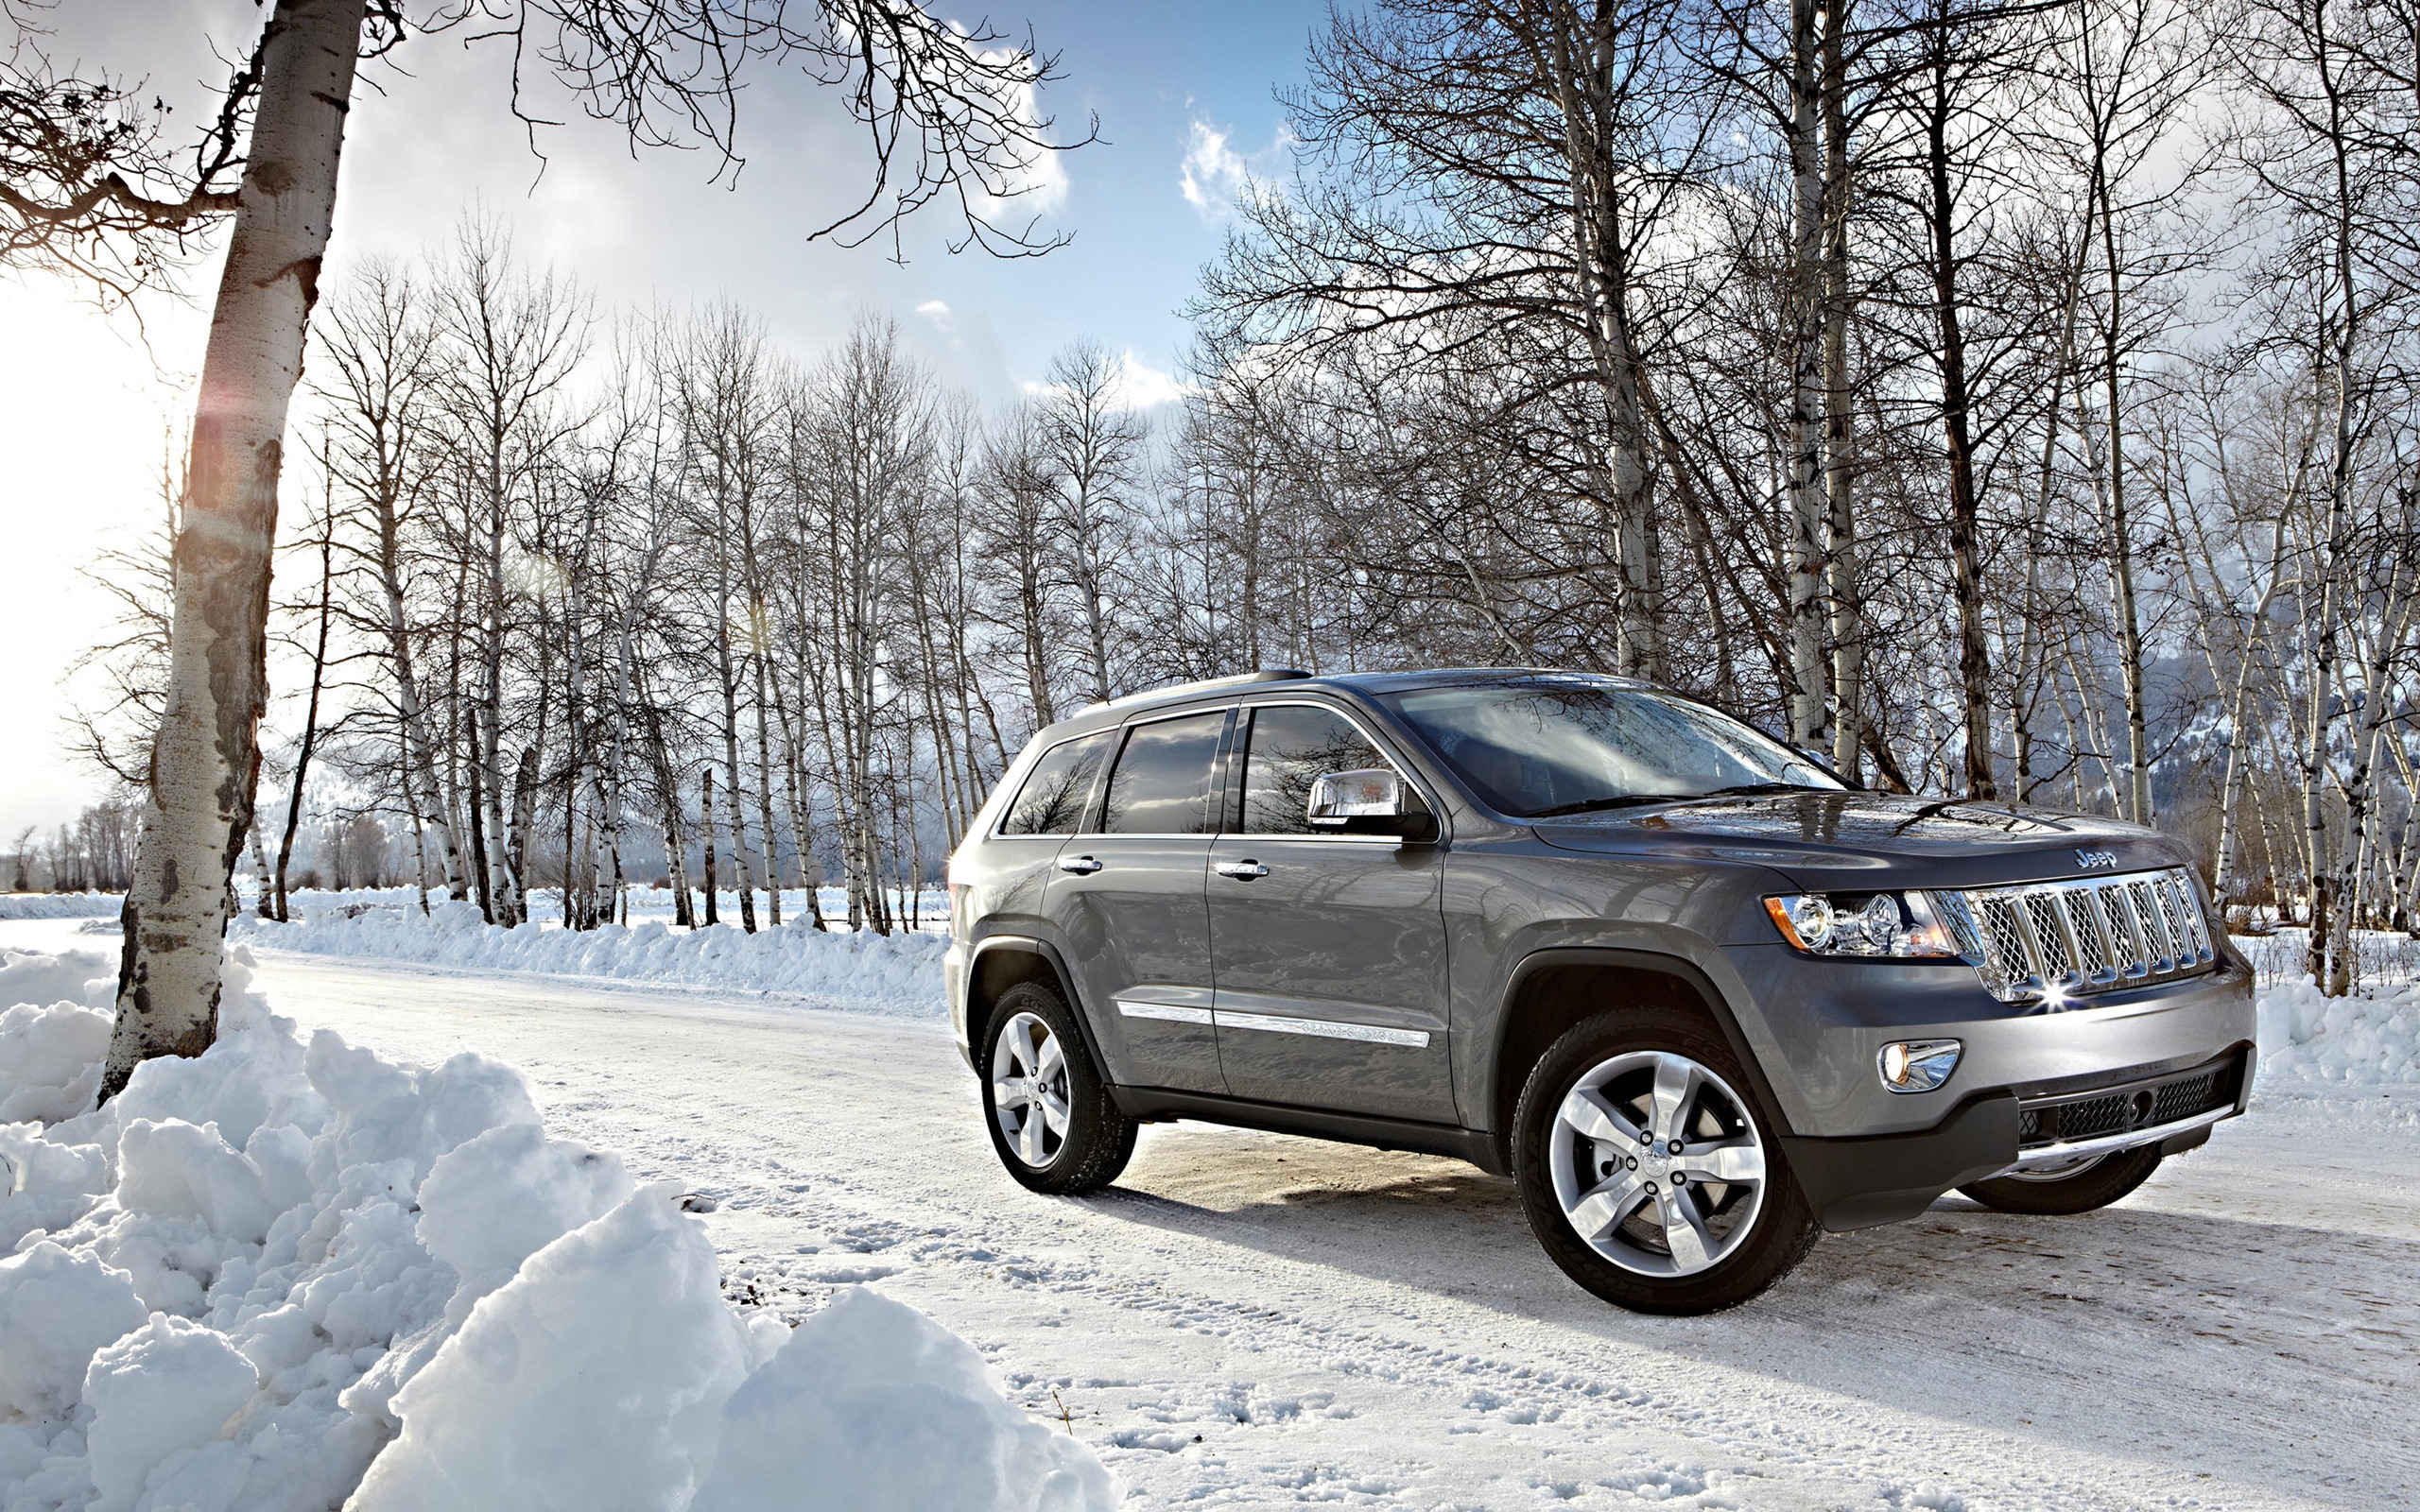 2012 Jeep Grand Cherokee for 2560 x 1600 widescreen resolution